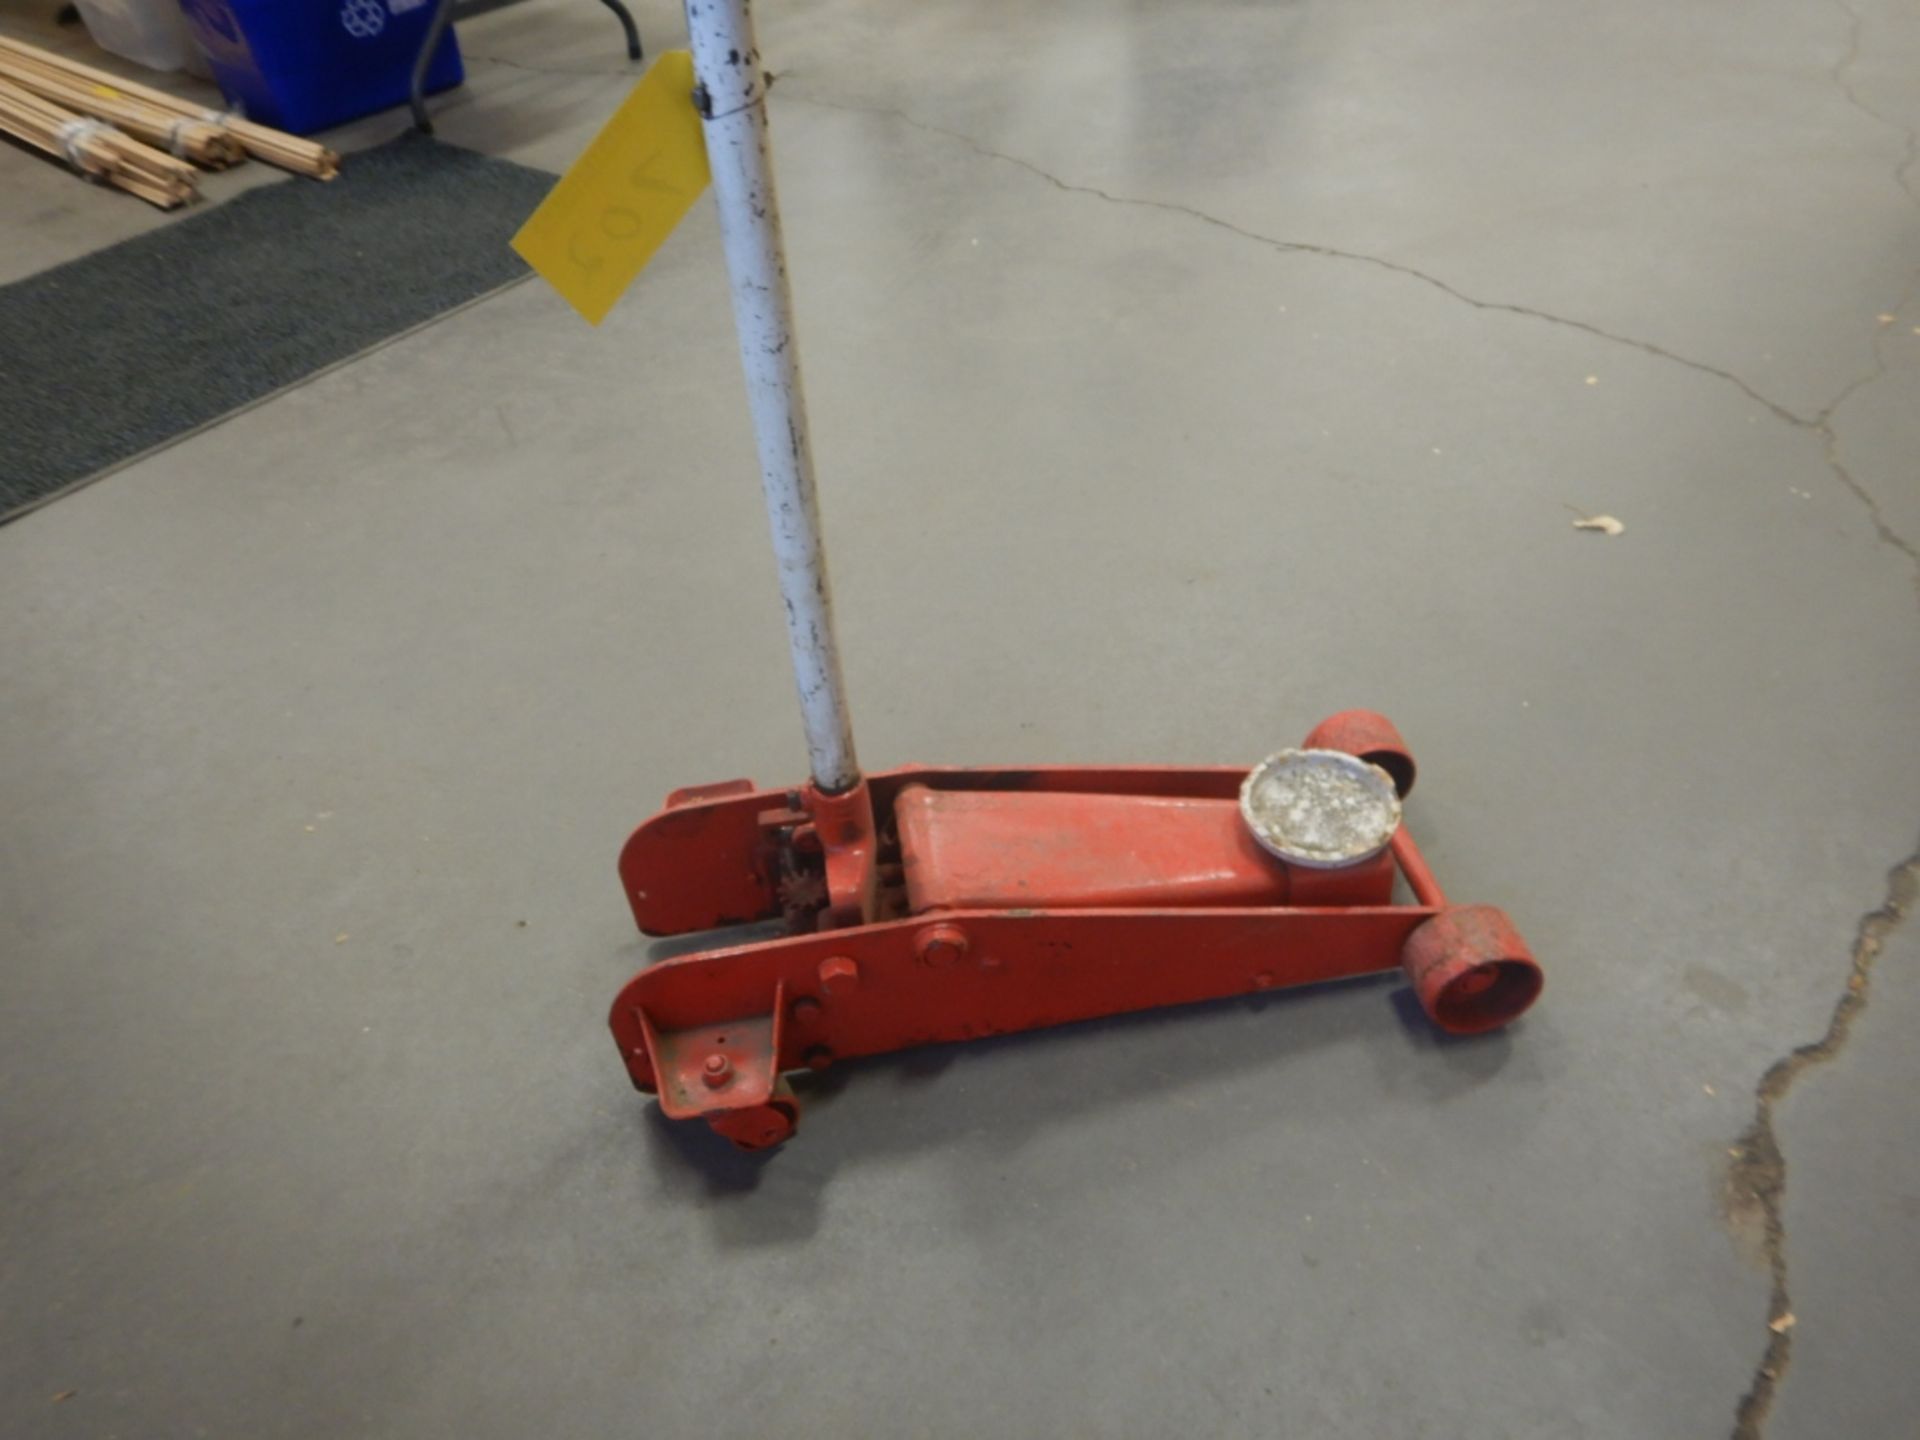 AUTOMOTIVE HYD. FLOOR JACK PAINTED RED AND WHITE - Image 3 of 3